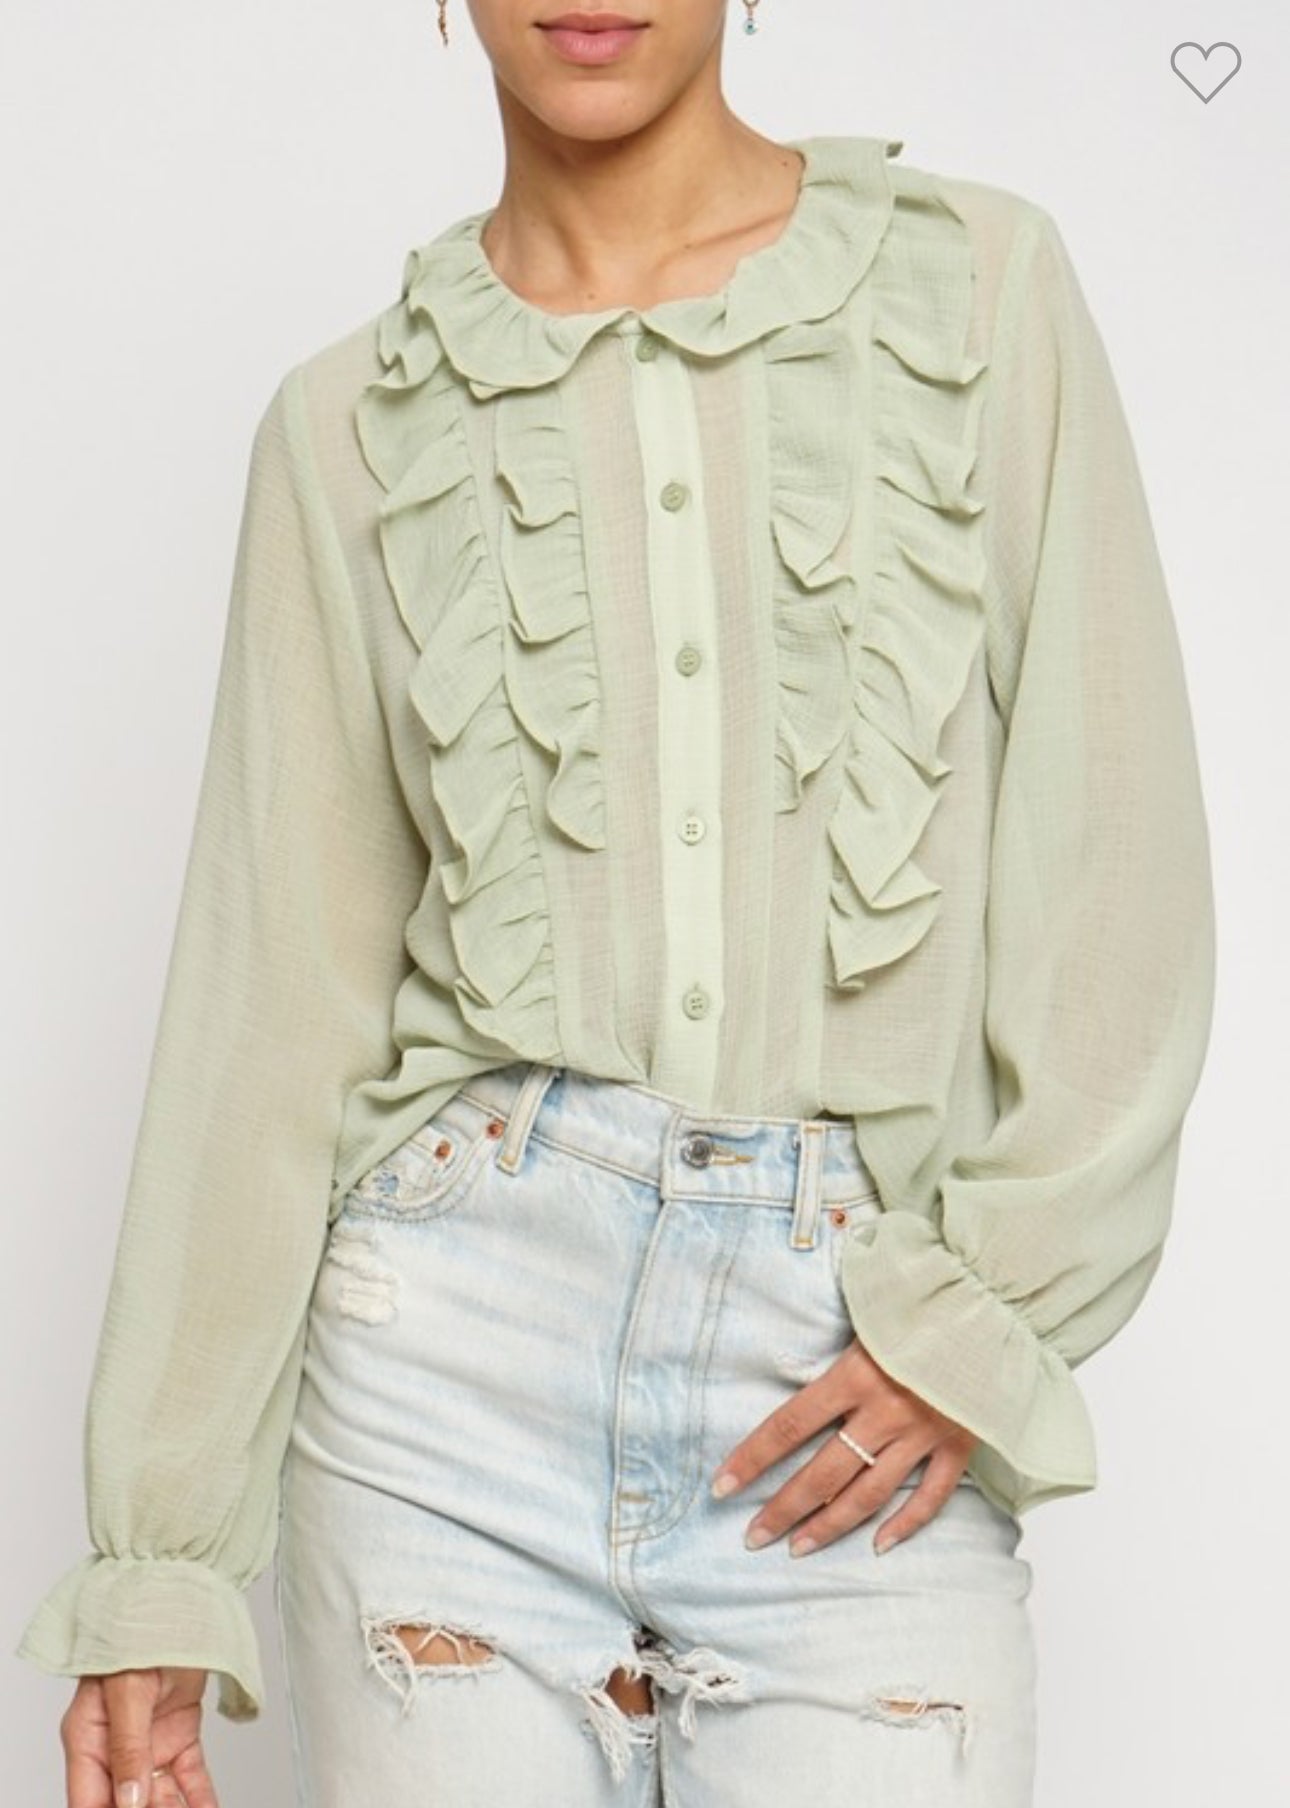 Ruffle Blouse - Out of the Blue